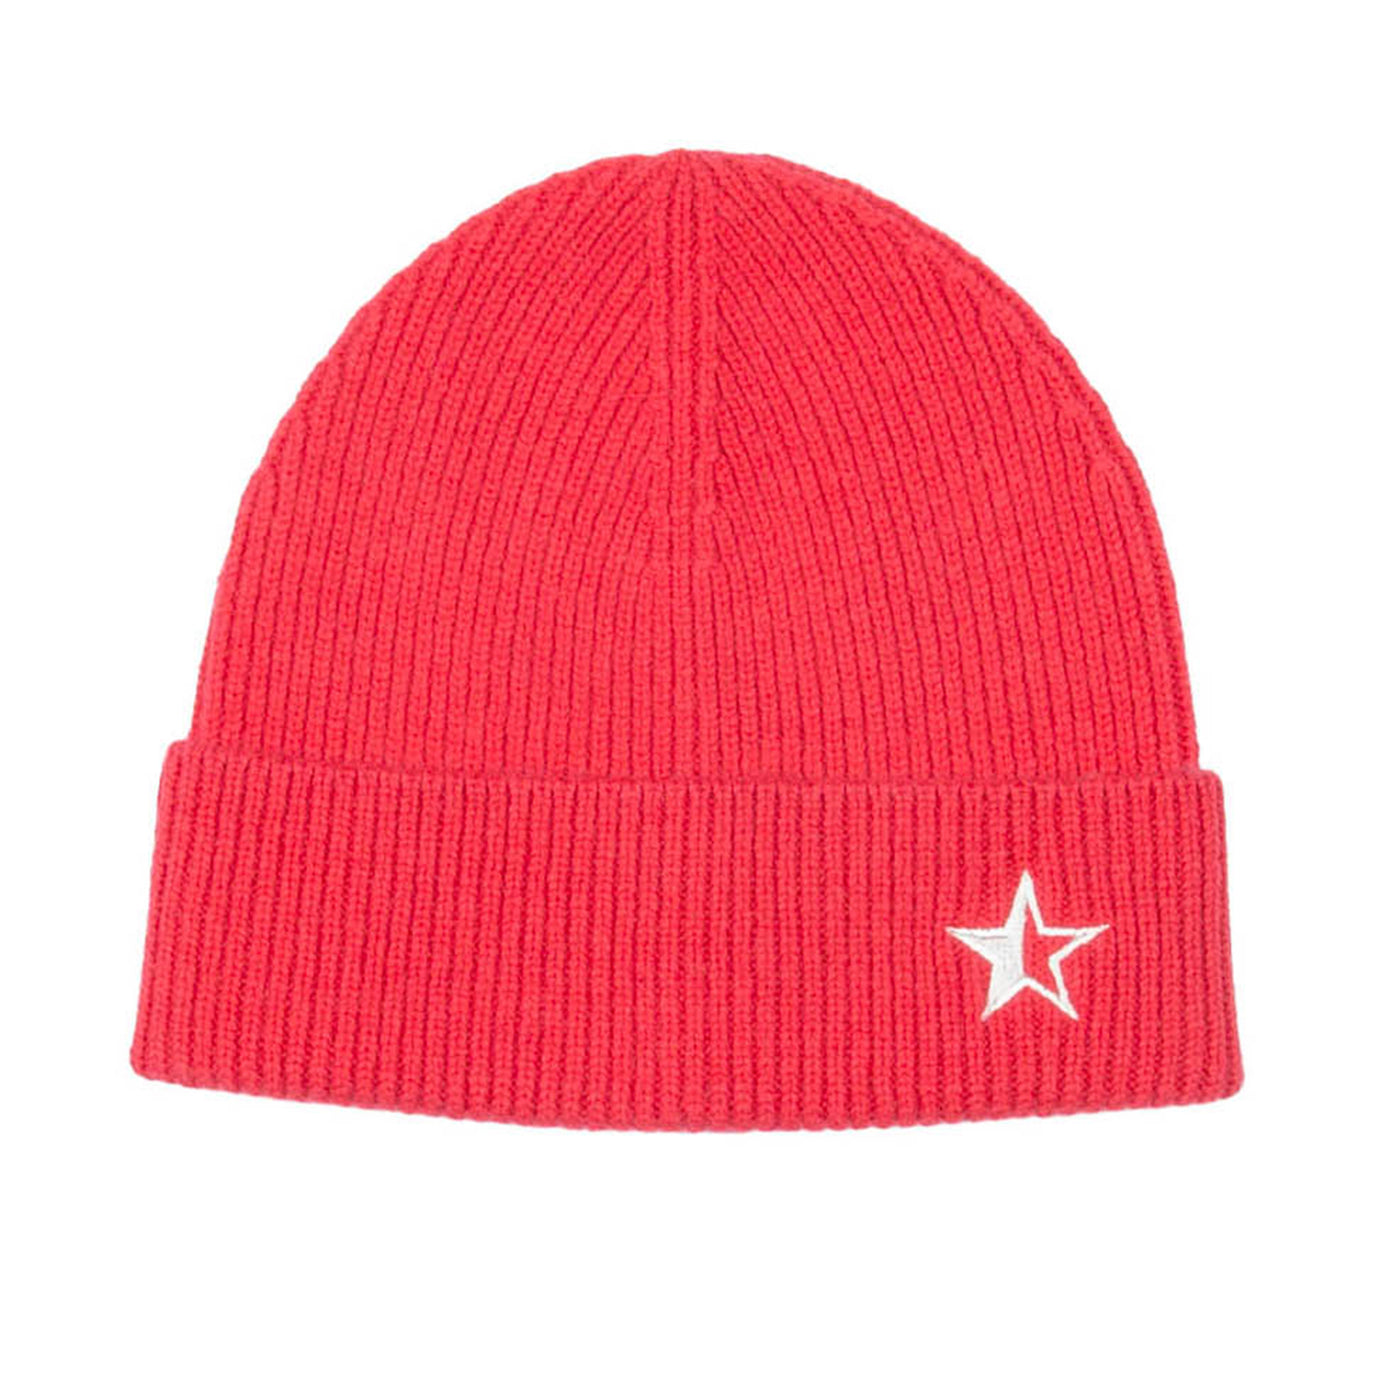 Luxe Star Beanie - Red